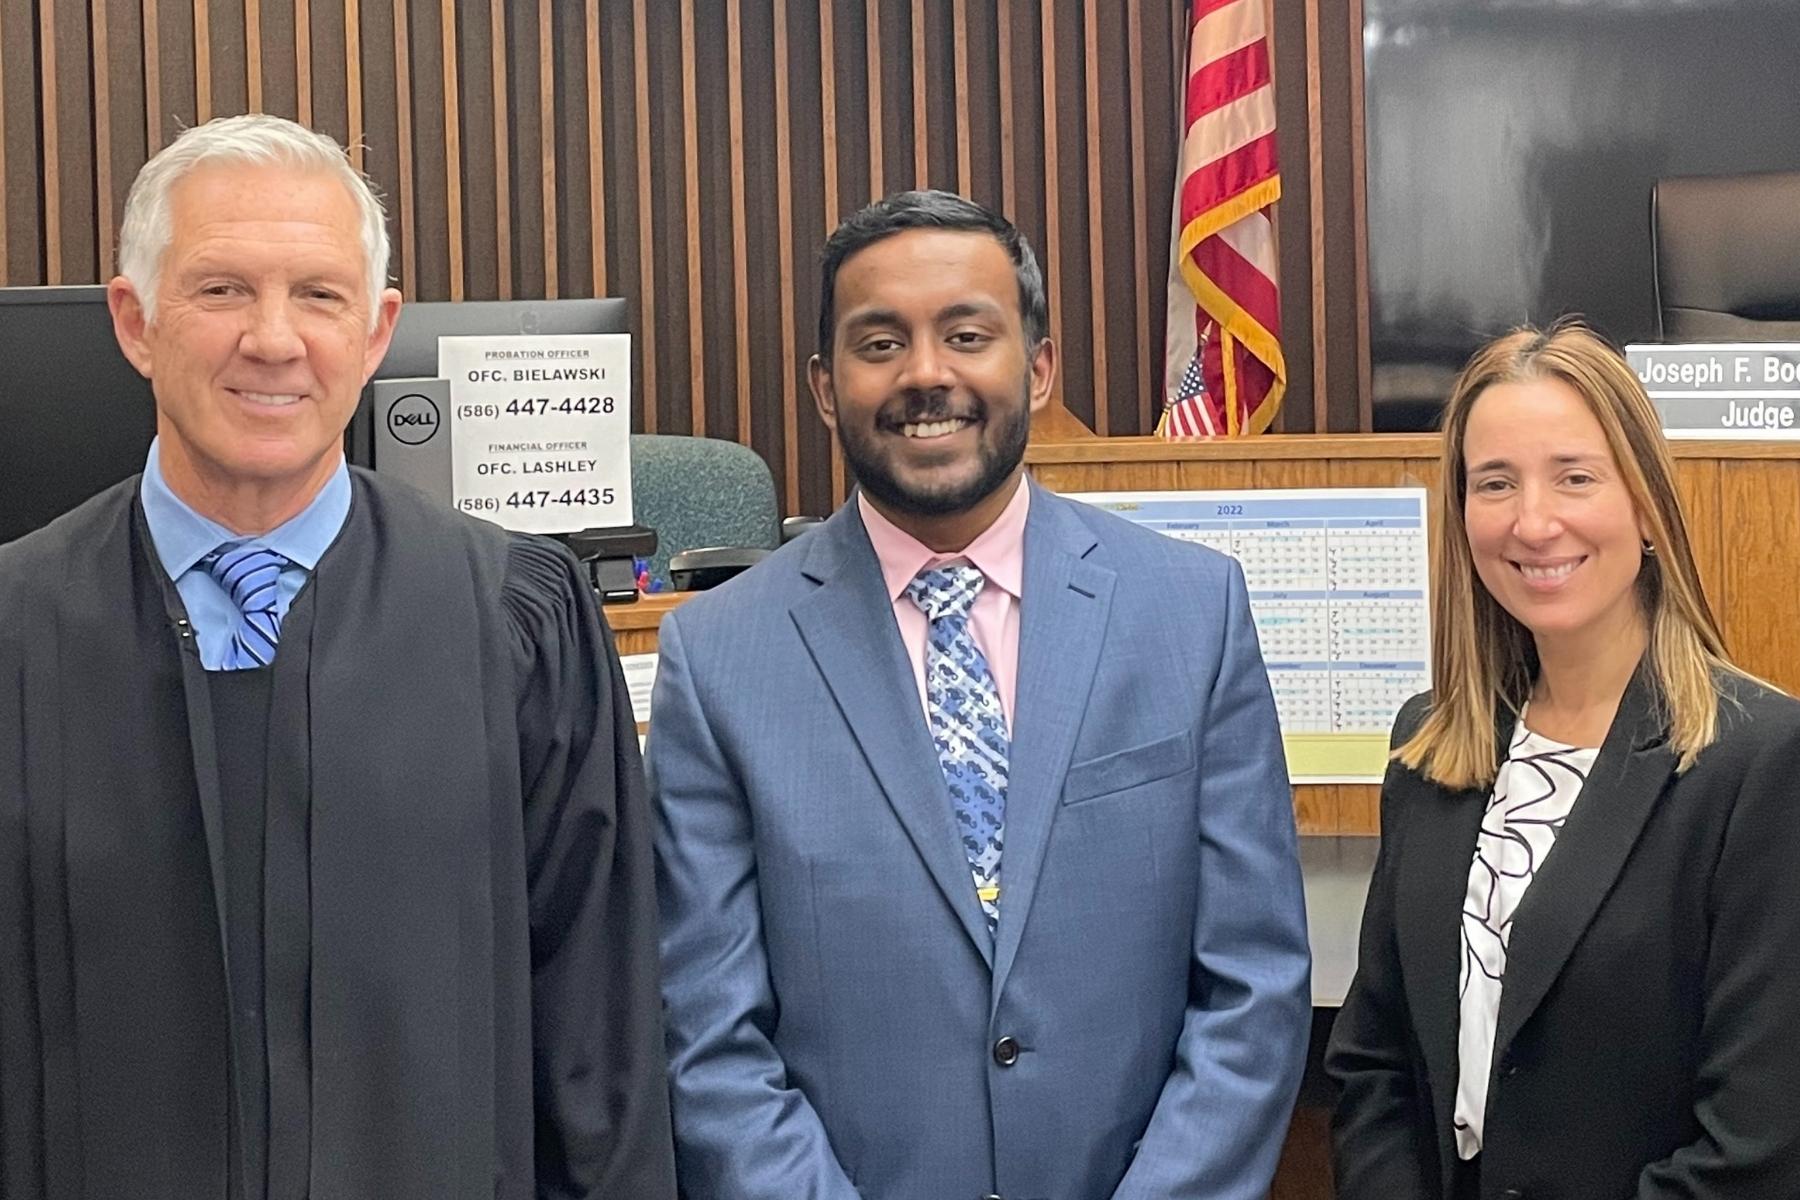 Muthu Veerappan posing with Judge Joseph F. Boedecker of the 39th District Court and Macomb County Assistant Prosecuting Attorney Jacqueline Gartin